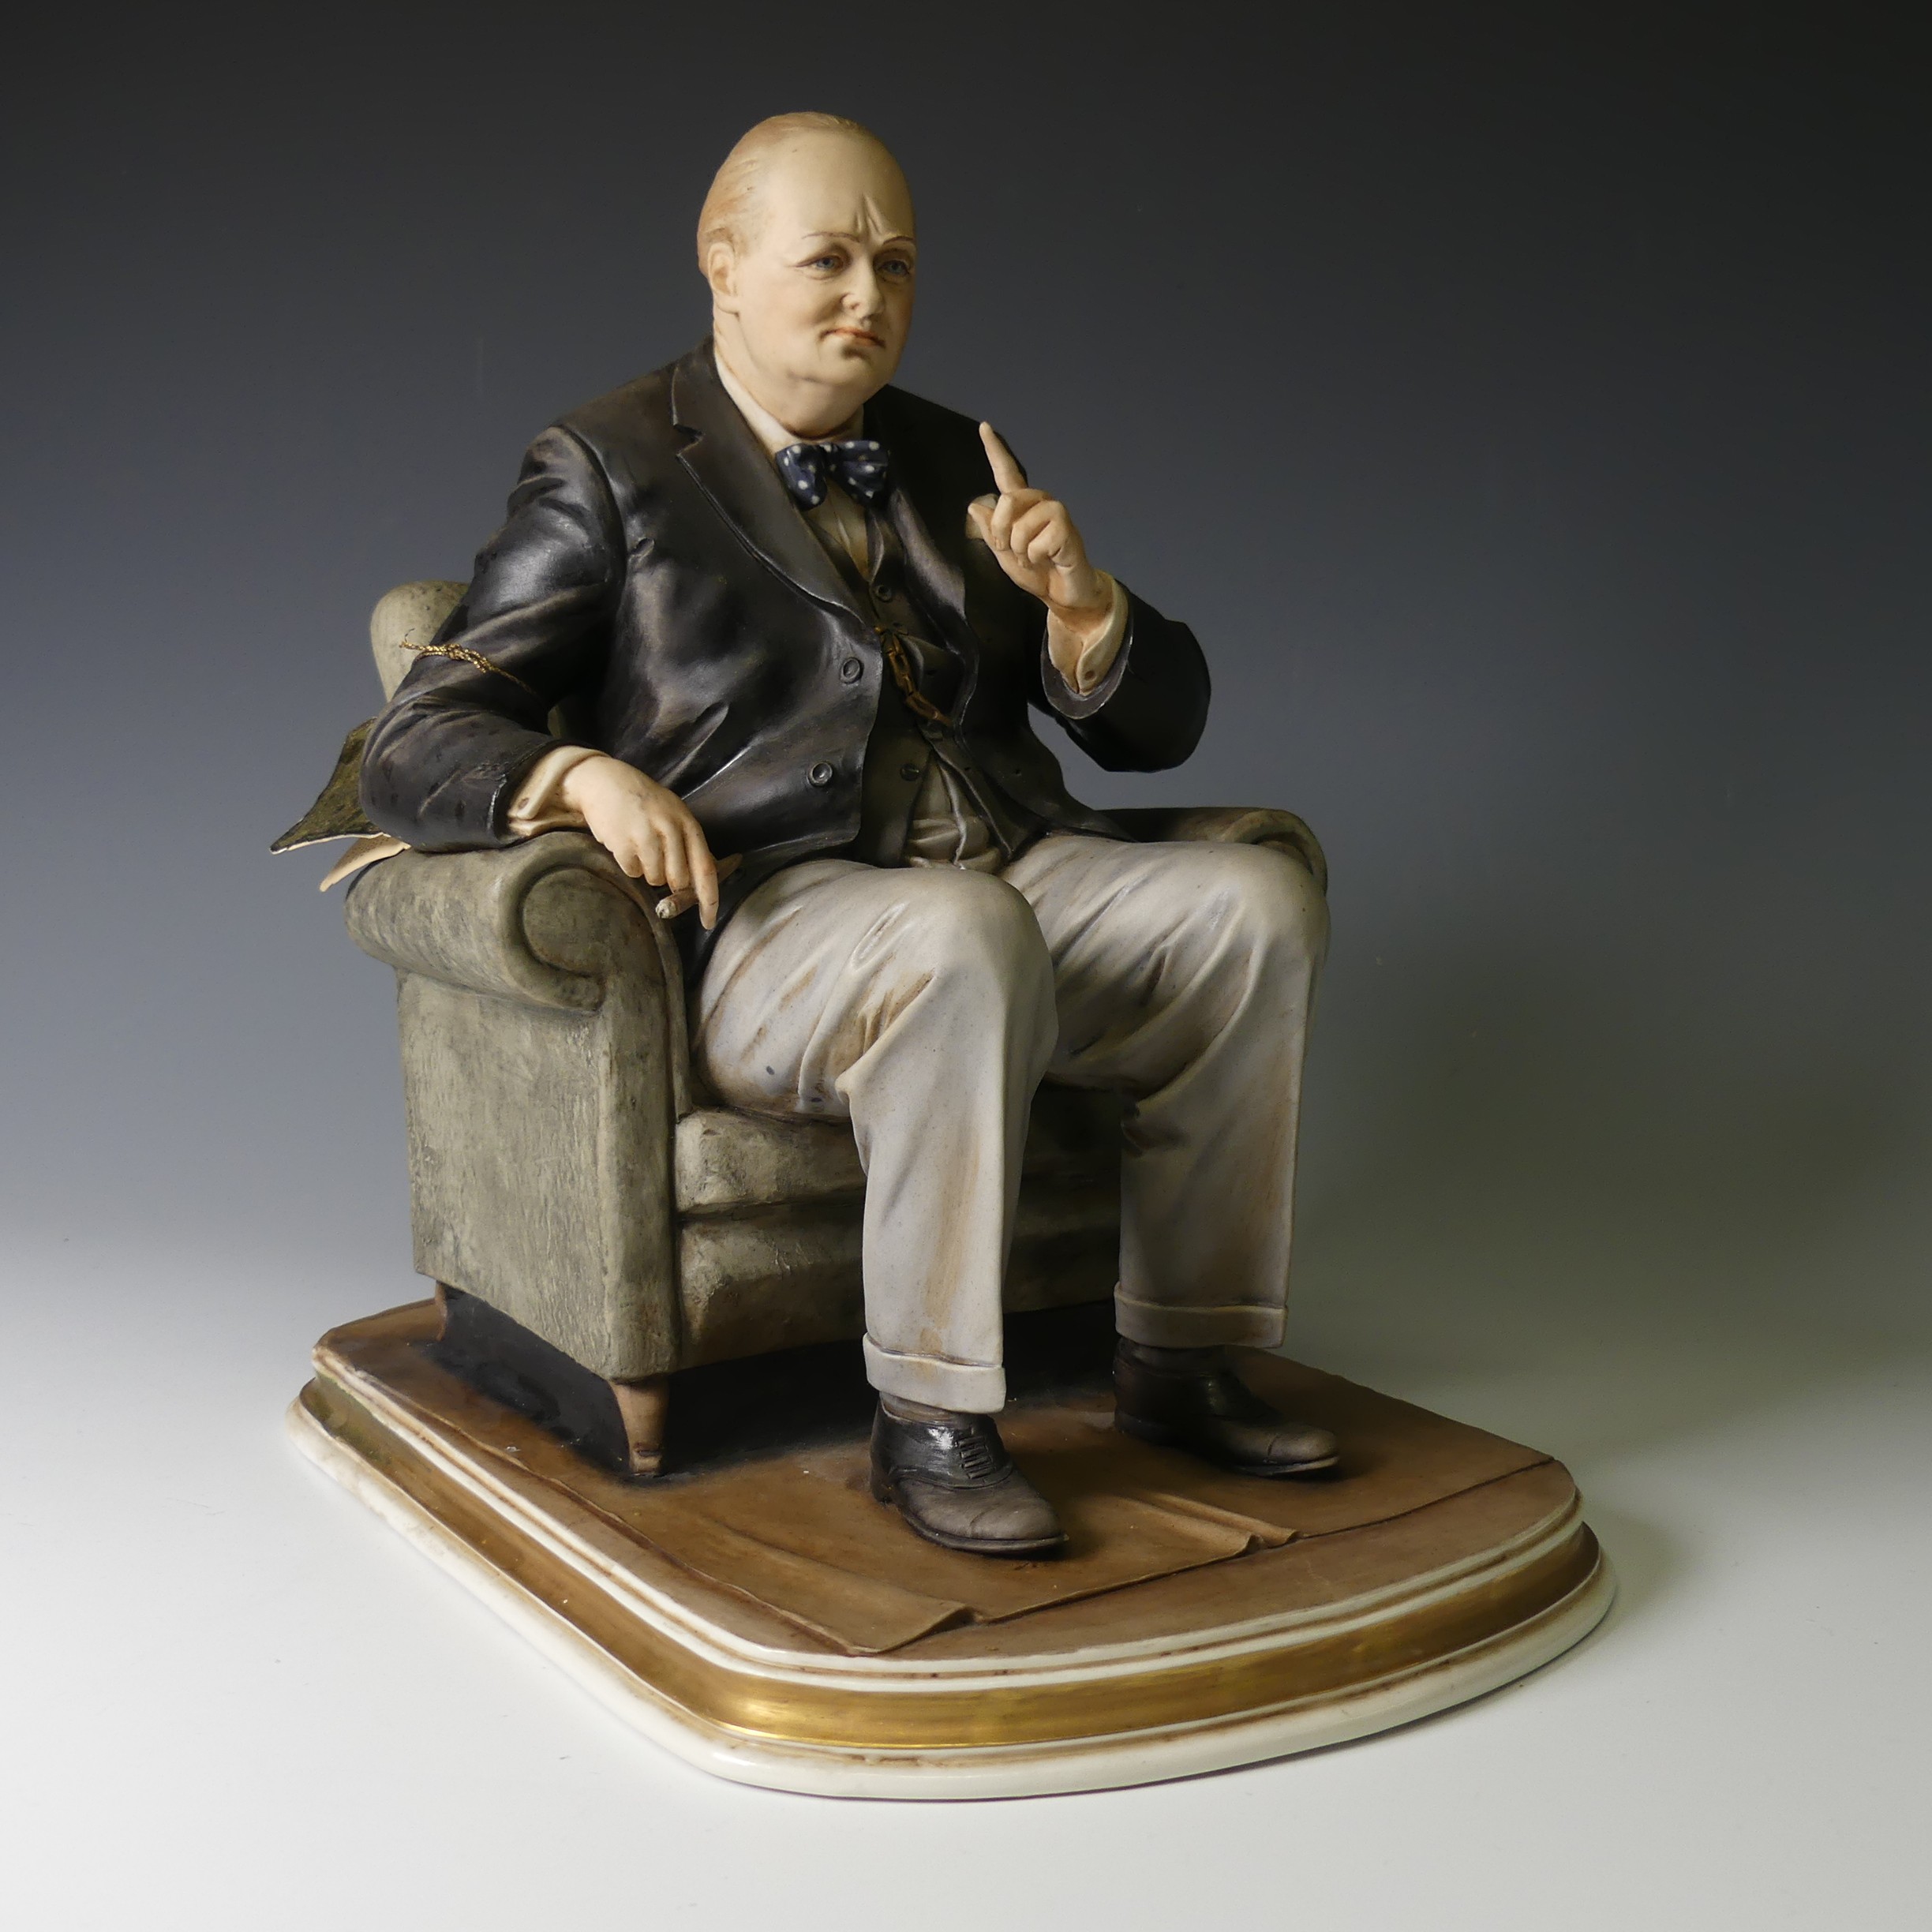 A limited edition Capodimonte figure of Winston Churchill, designed by Bruno Merli, modelled in a - Image 2 of 7